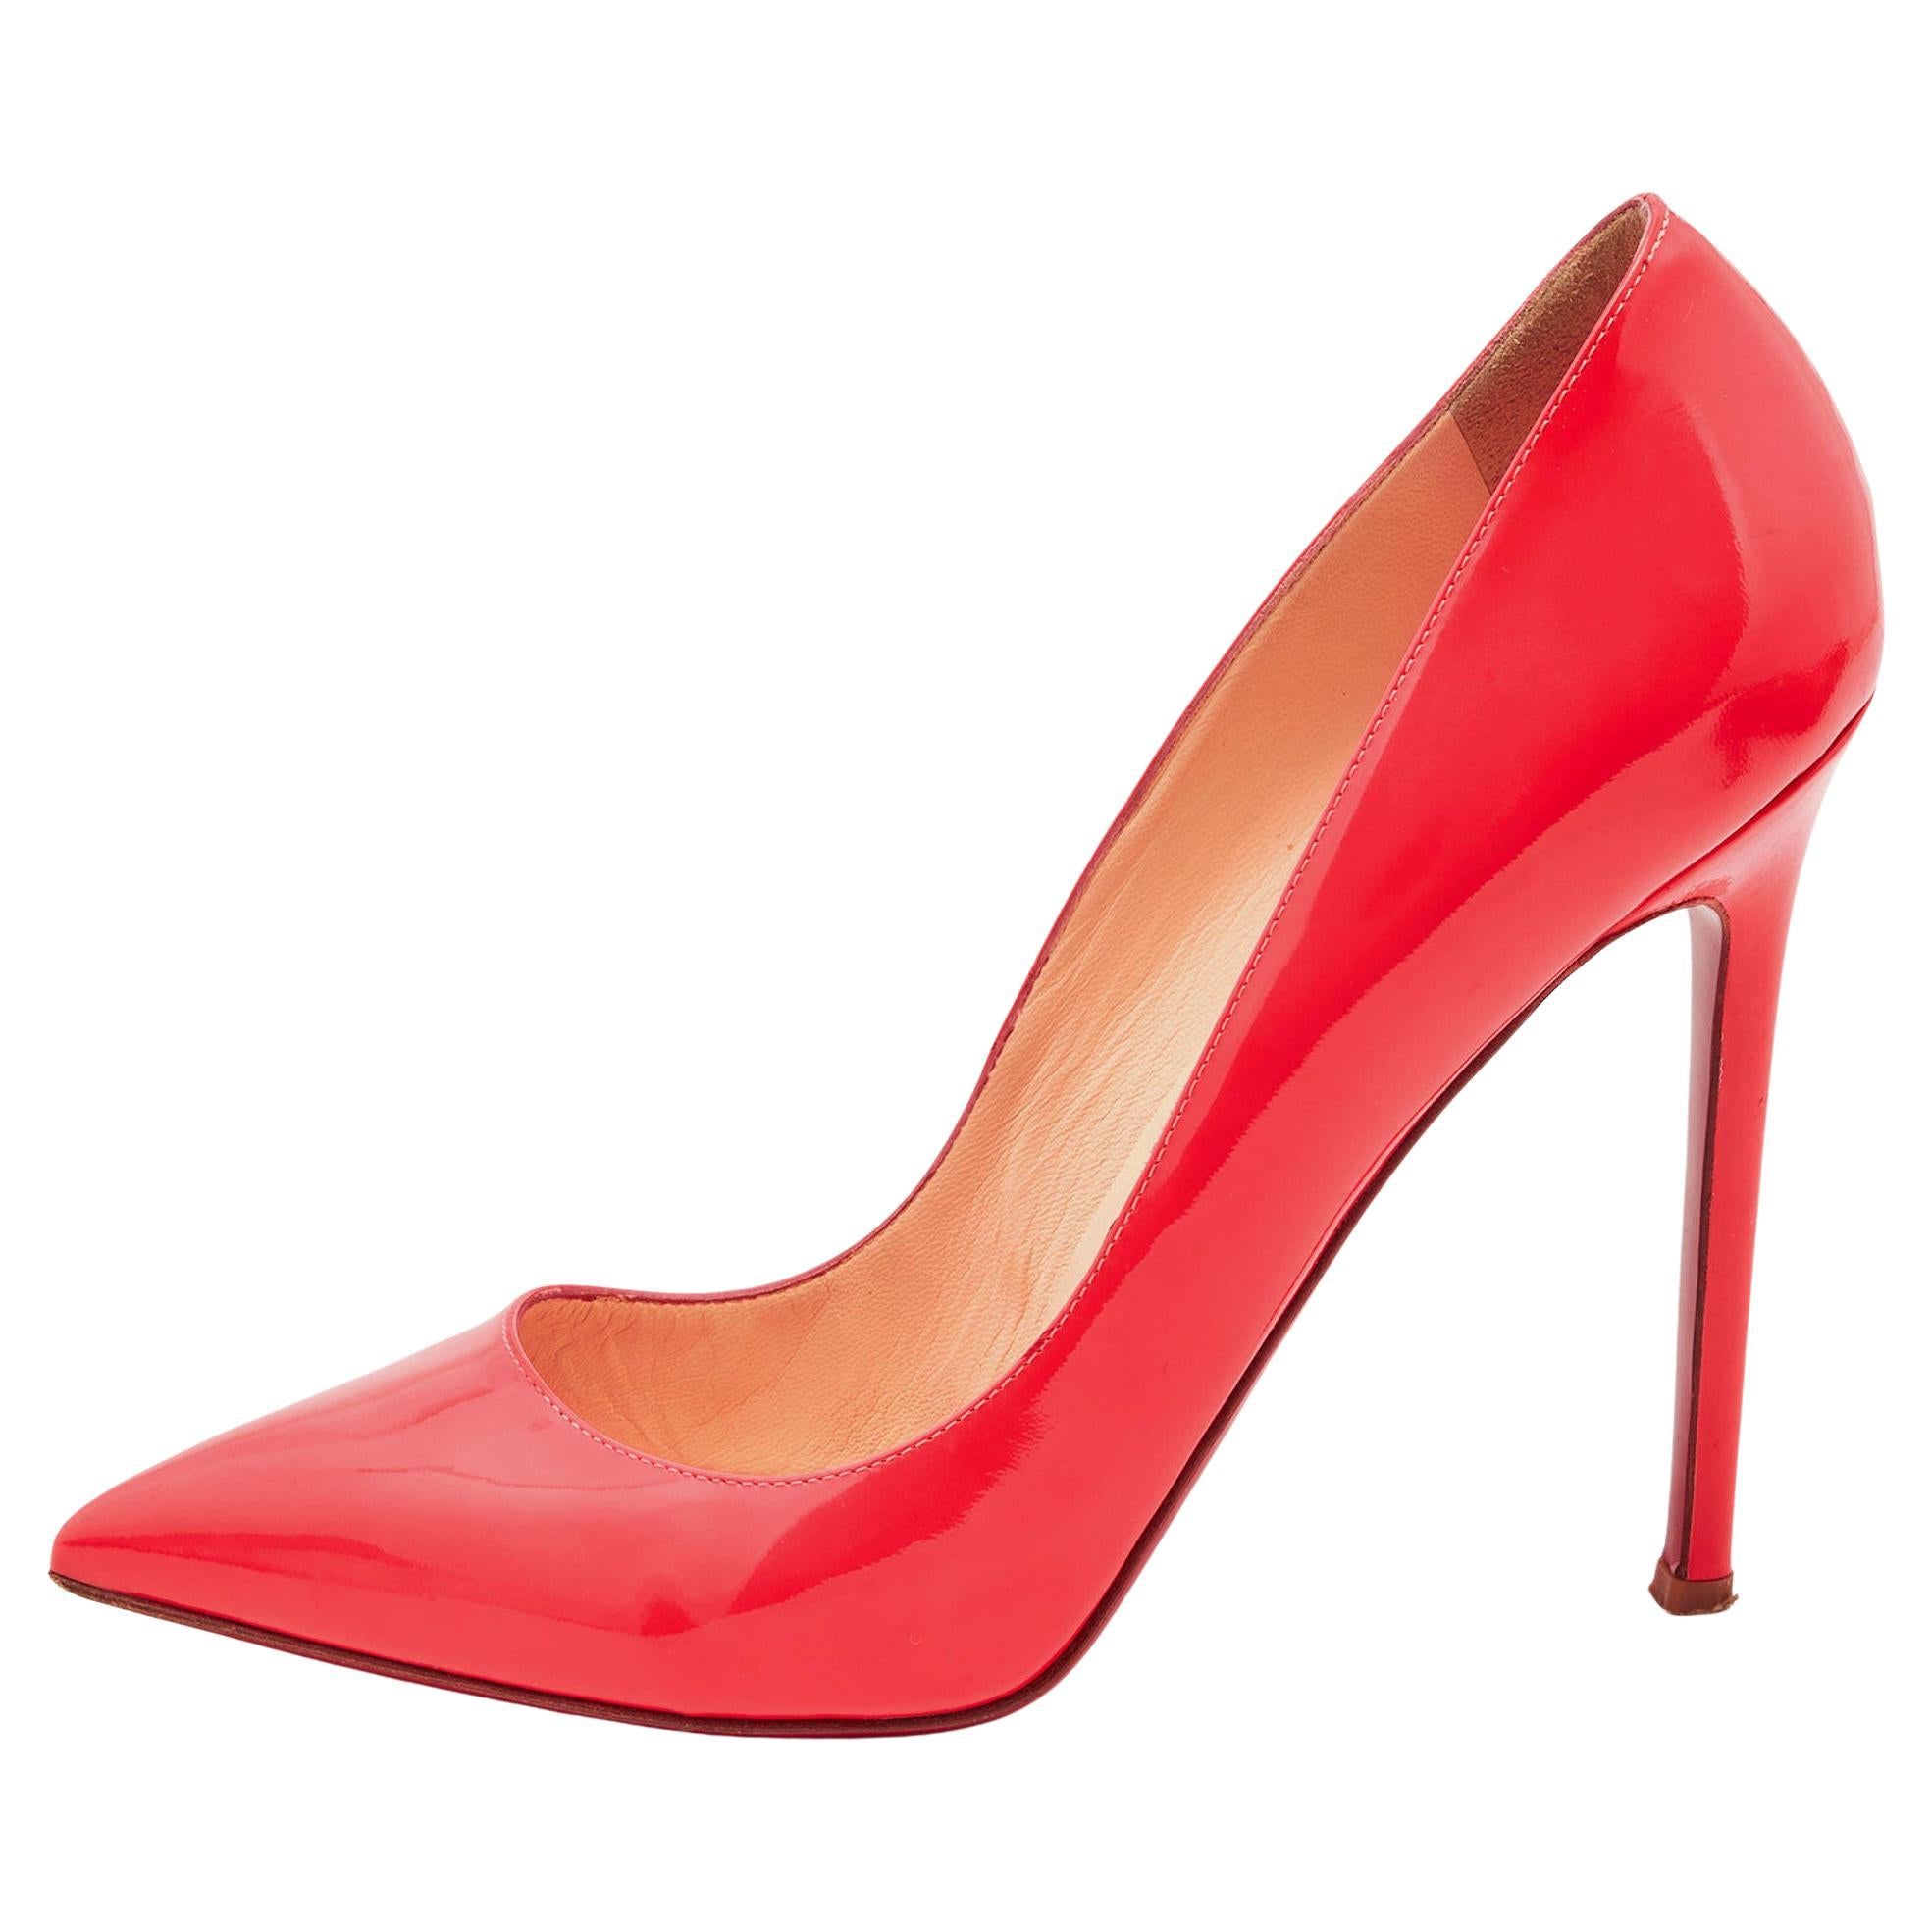 Christian Louboutin Neon Coral Patent So Kate Pointed Toe Pumps Size 40.5